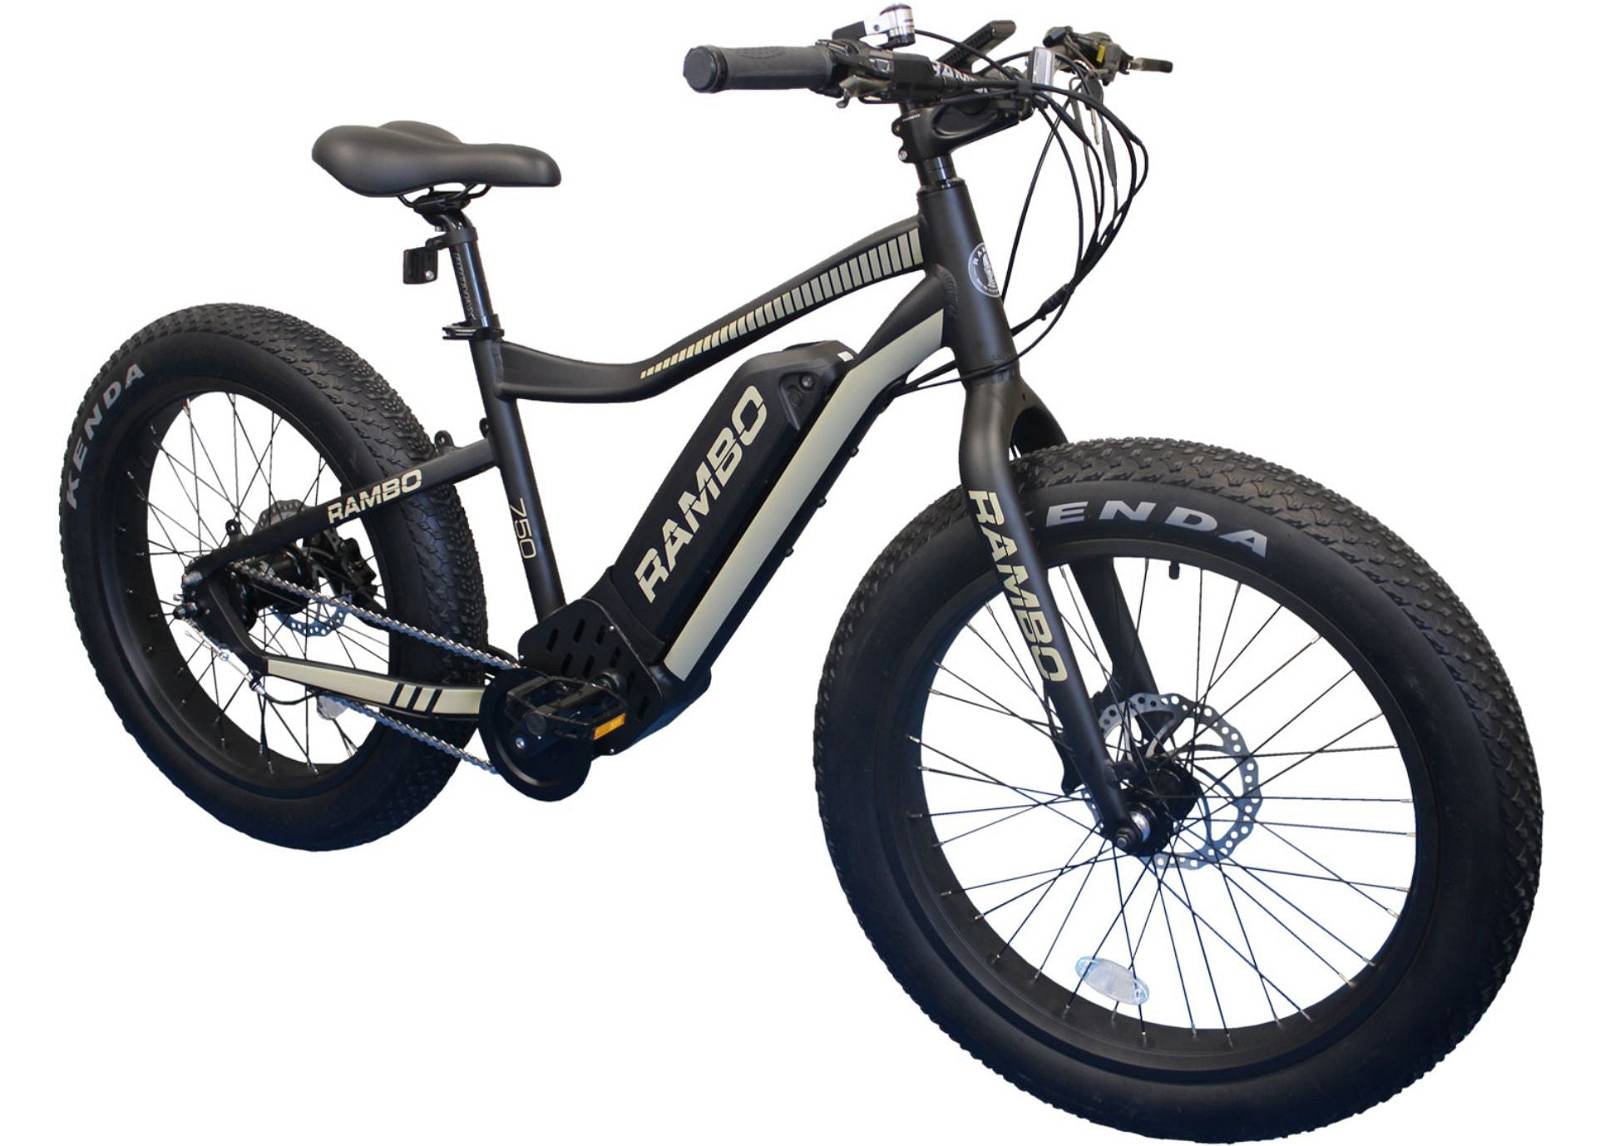 Rambo Ryder Hunting Electric Bike Review